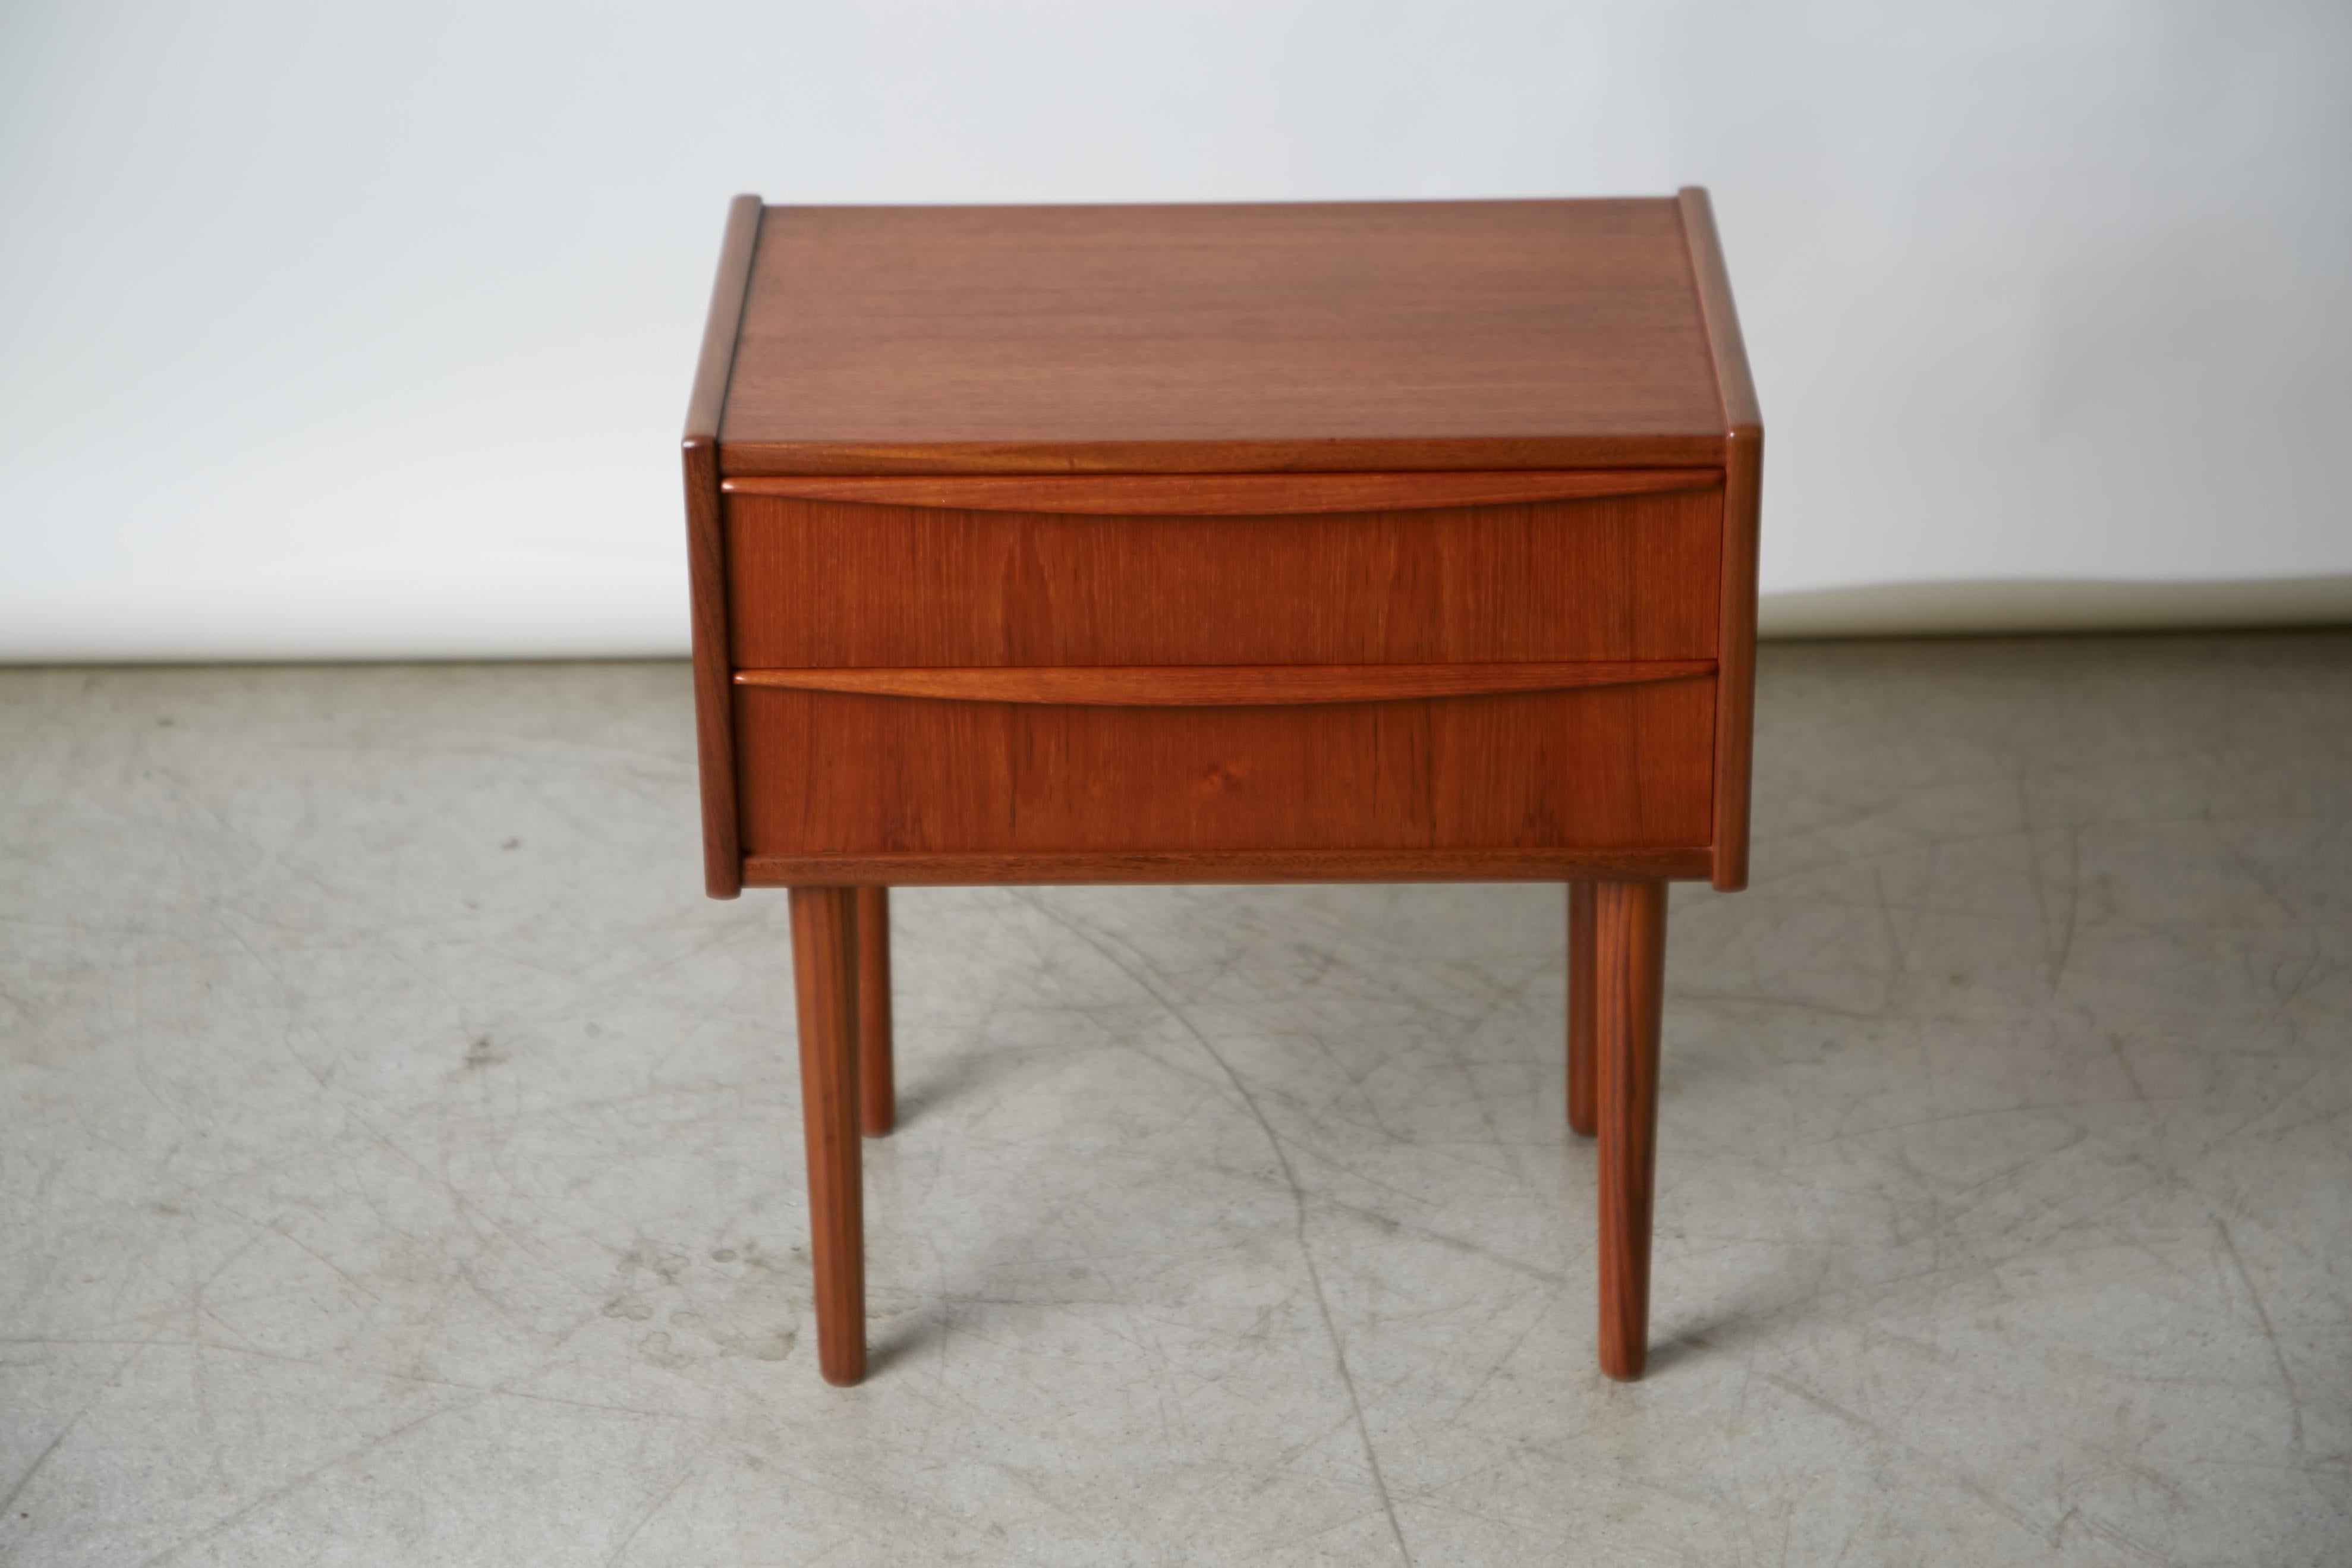 This lovely Mid-Century Modern teak bedside end table, in the style of Arne Vodder, is in excellent condition and ready to be used immediately in your residential design project. 

We only have a single of this particular piece.

Measurements: